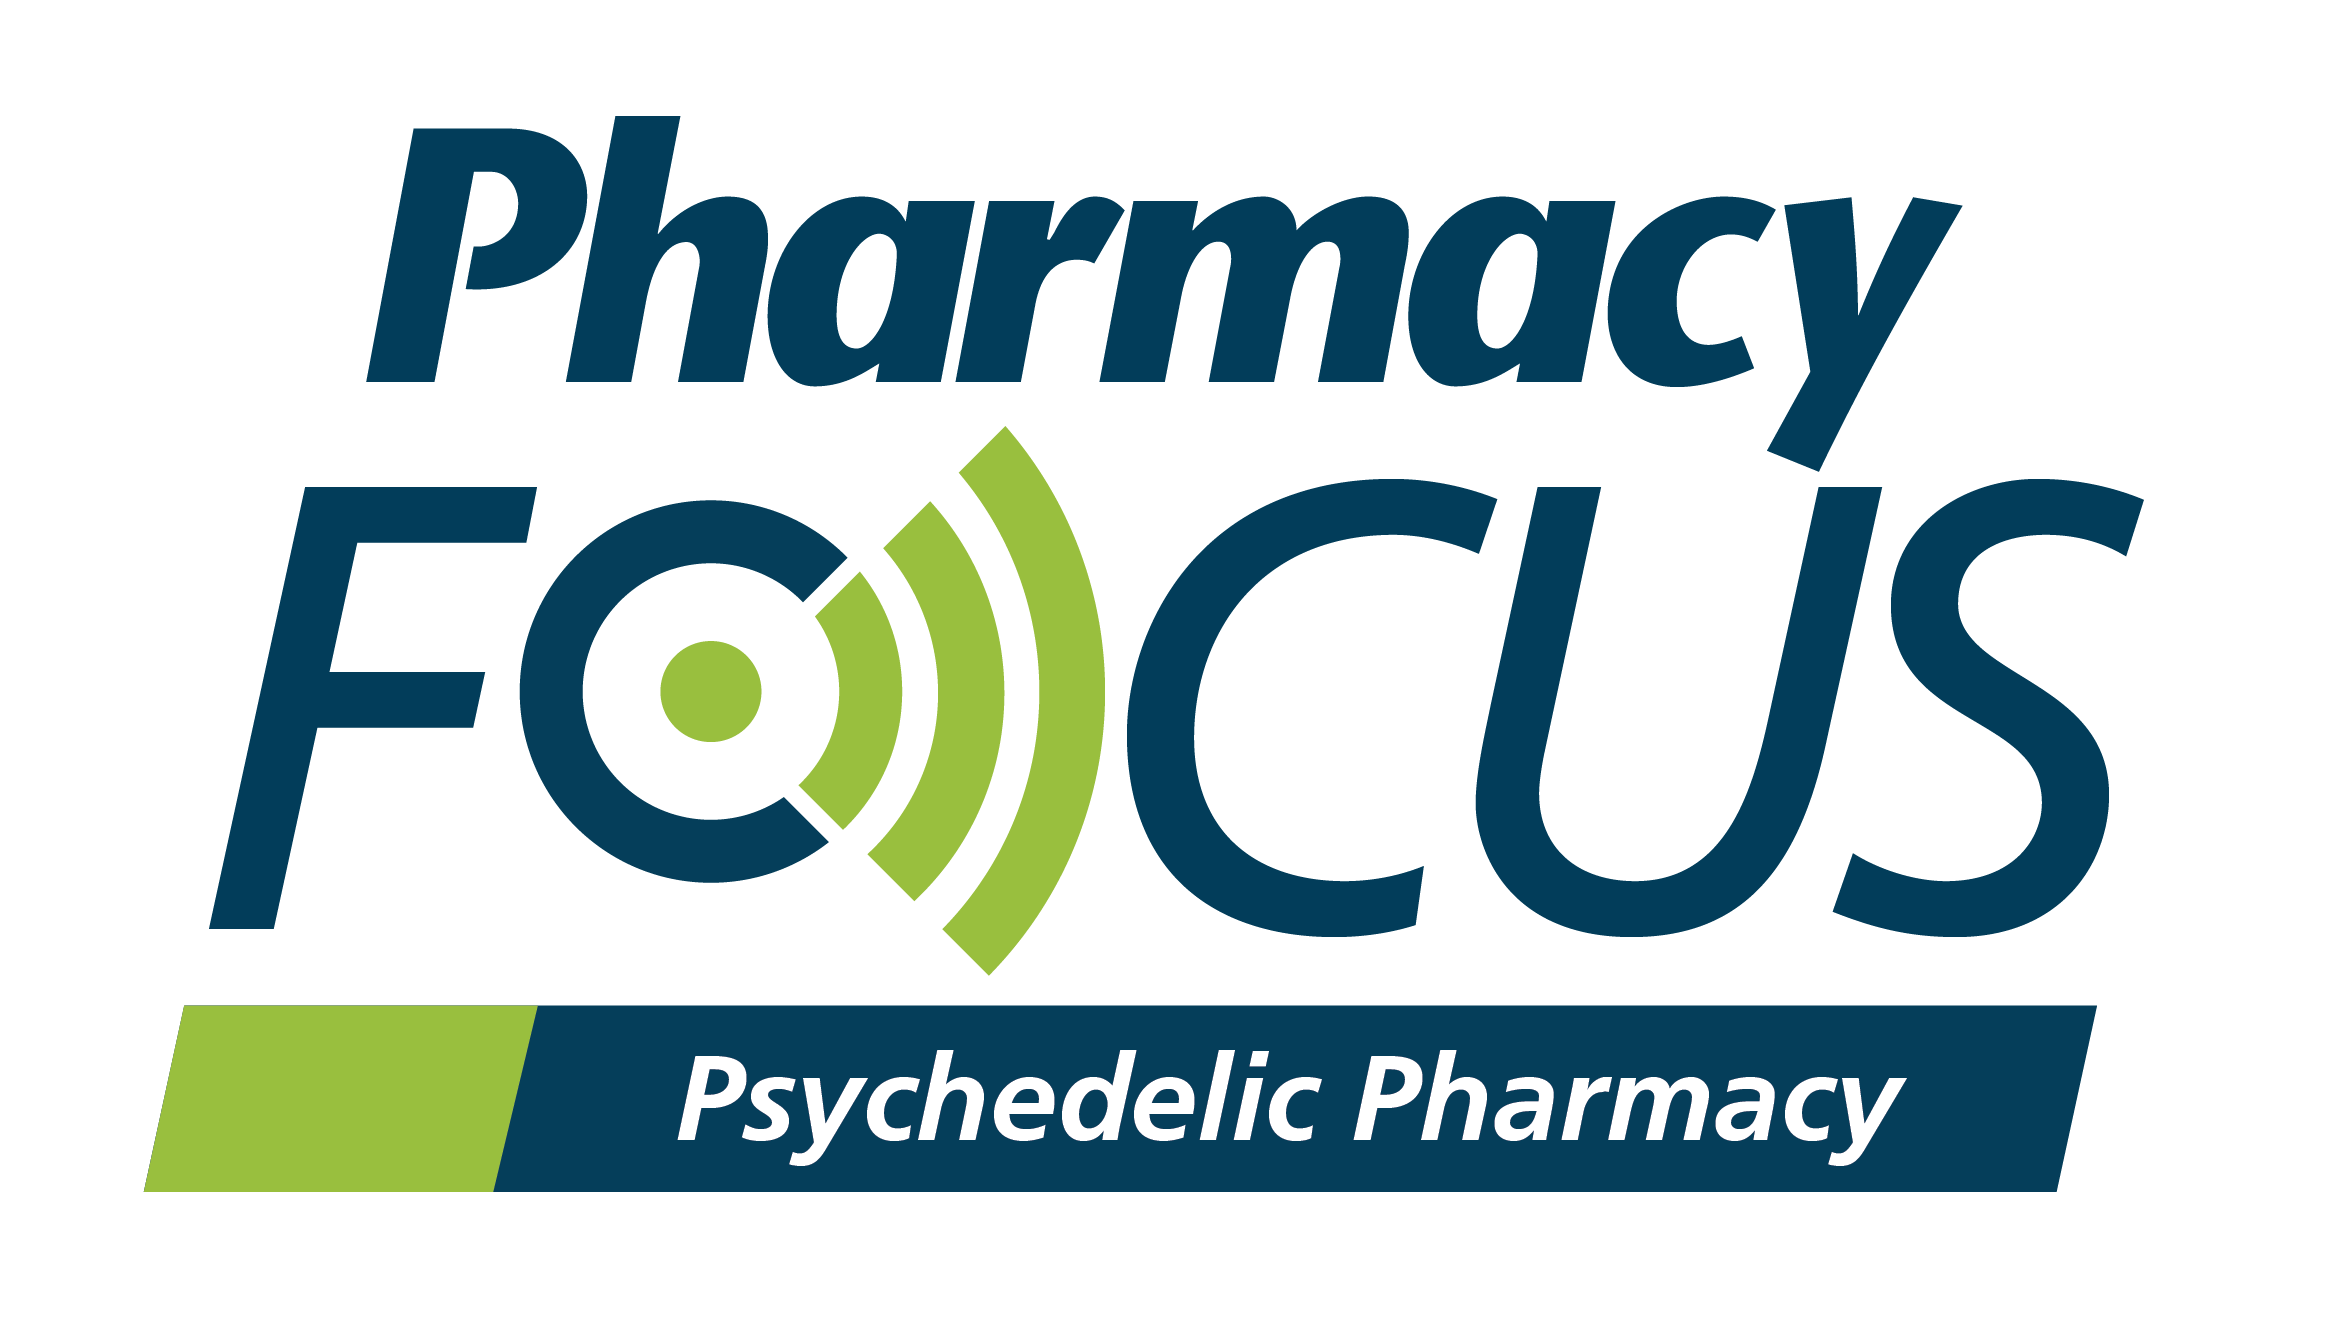 Pharmacy Focus: Psychedelic Pharmacy - Potential Drug-Drug Interactions and Adverse Effects With Psychedelic Medicines